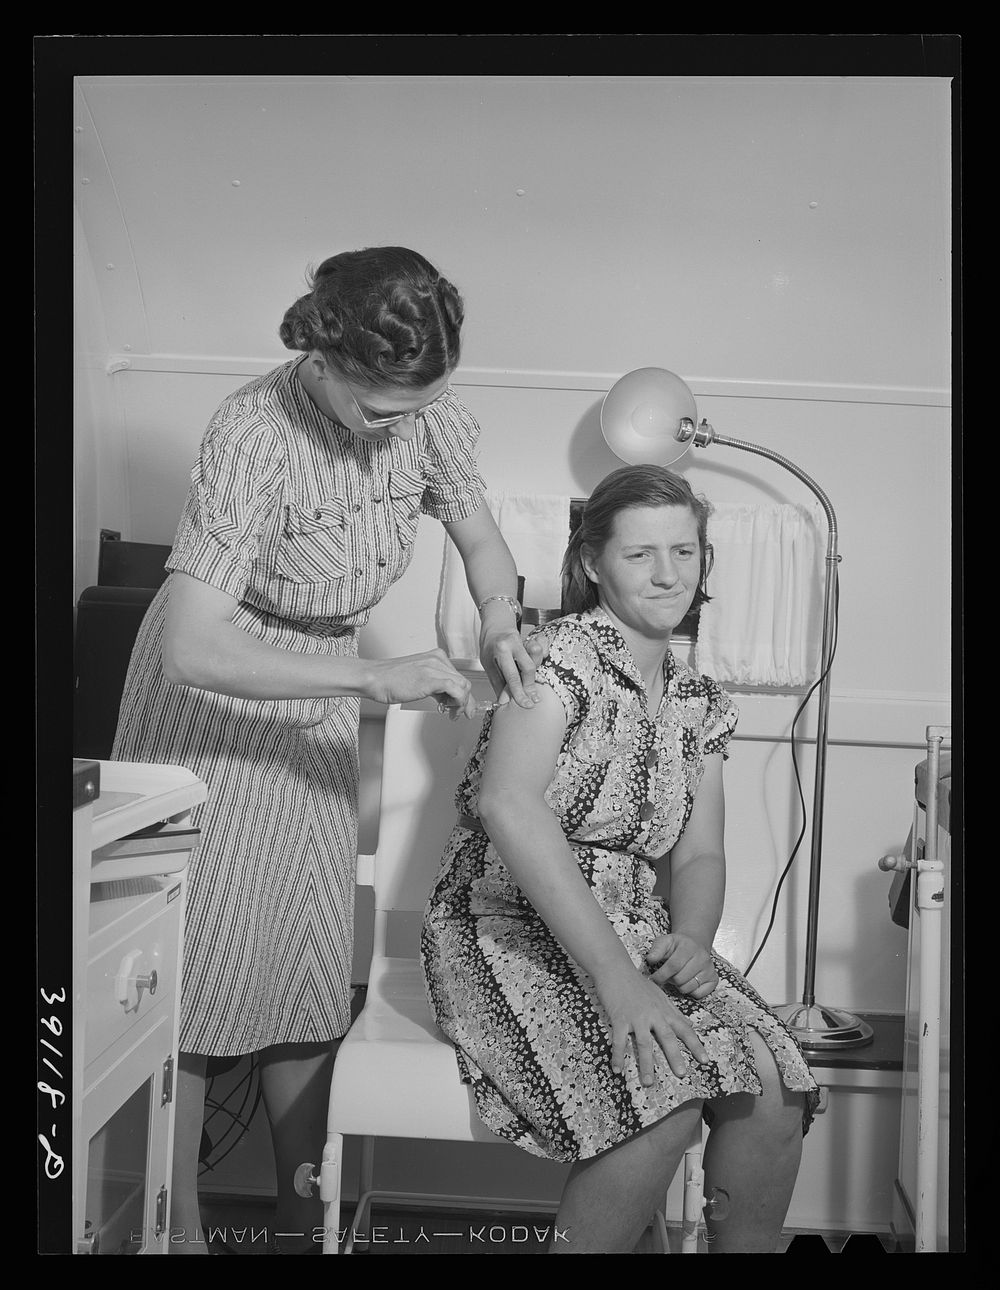 Nurse administers hypodermic to wife of farm worker who lives at the FSA (Farm Security Administration) migratory labor camp…